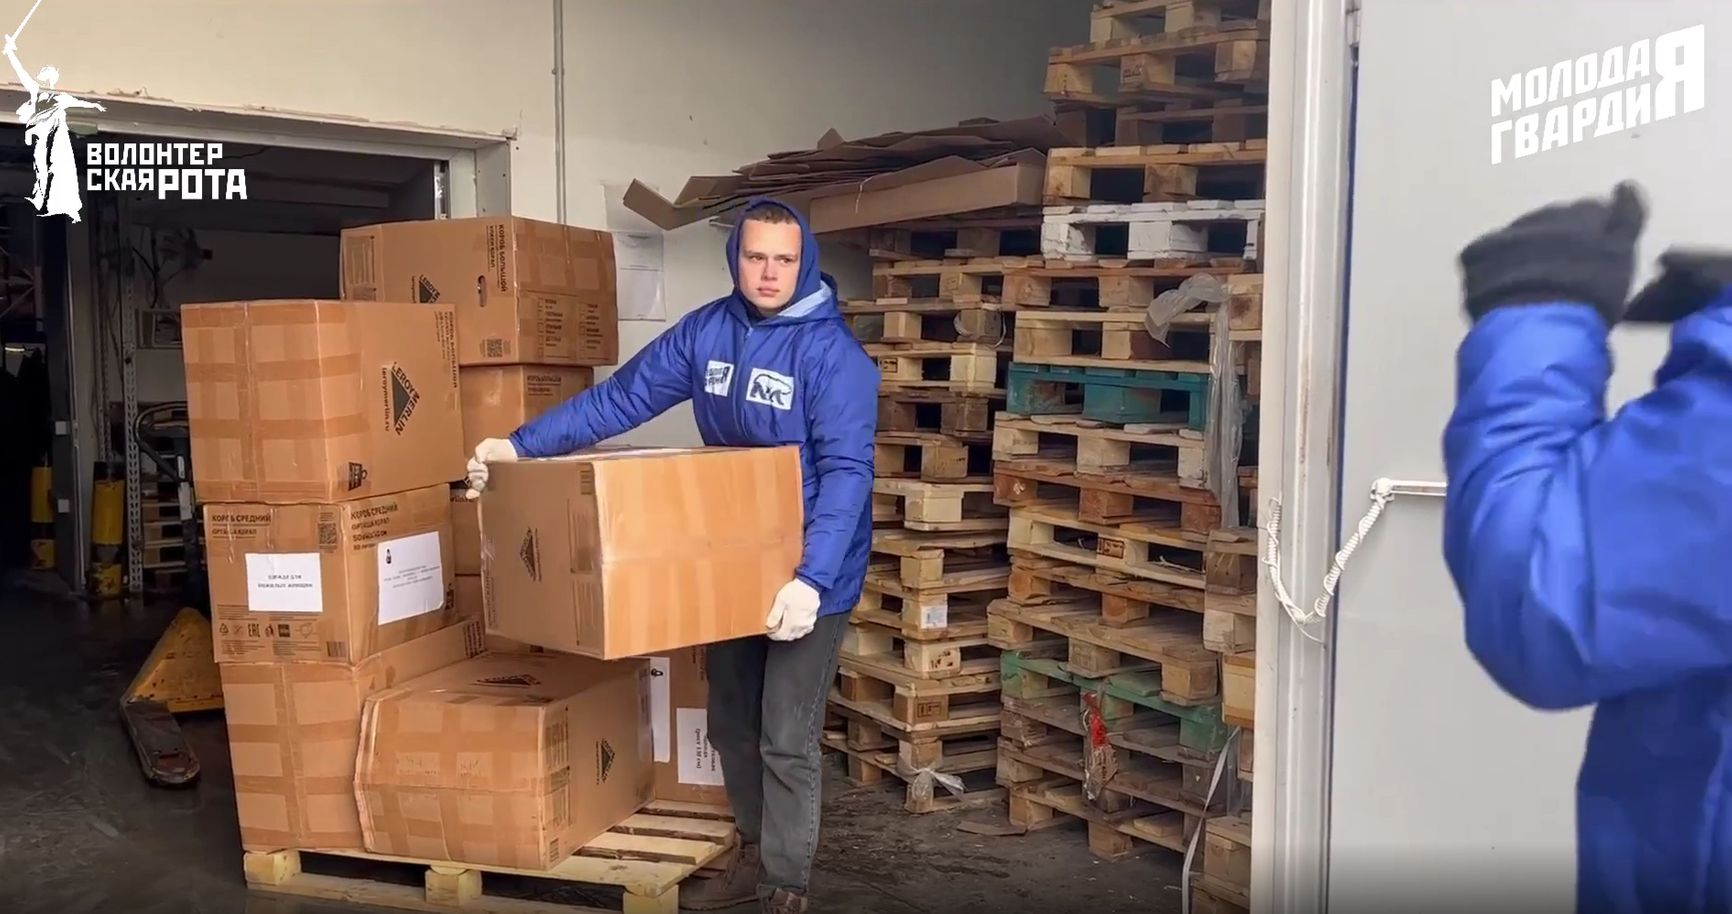 A still from a video on “humanitarian aid” deliveries to Mariupol